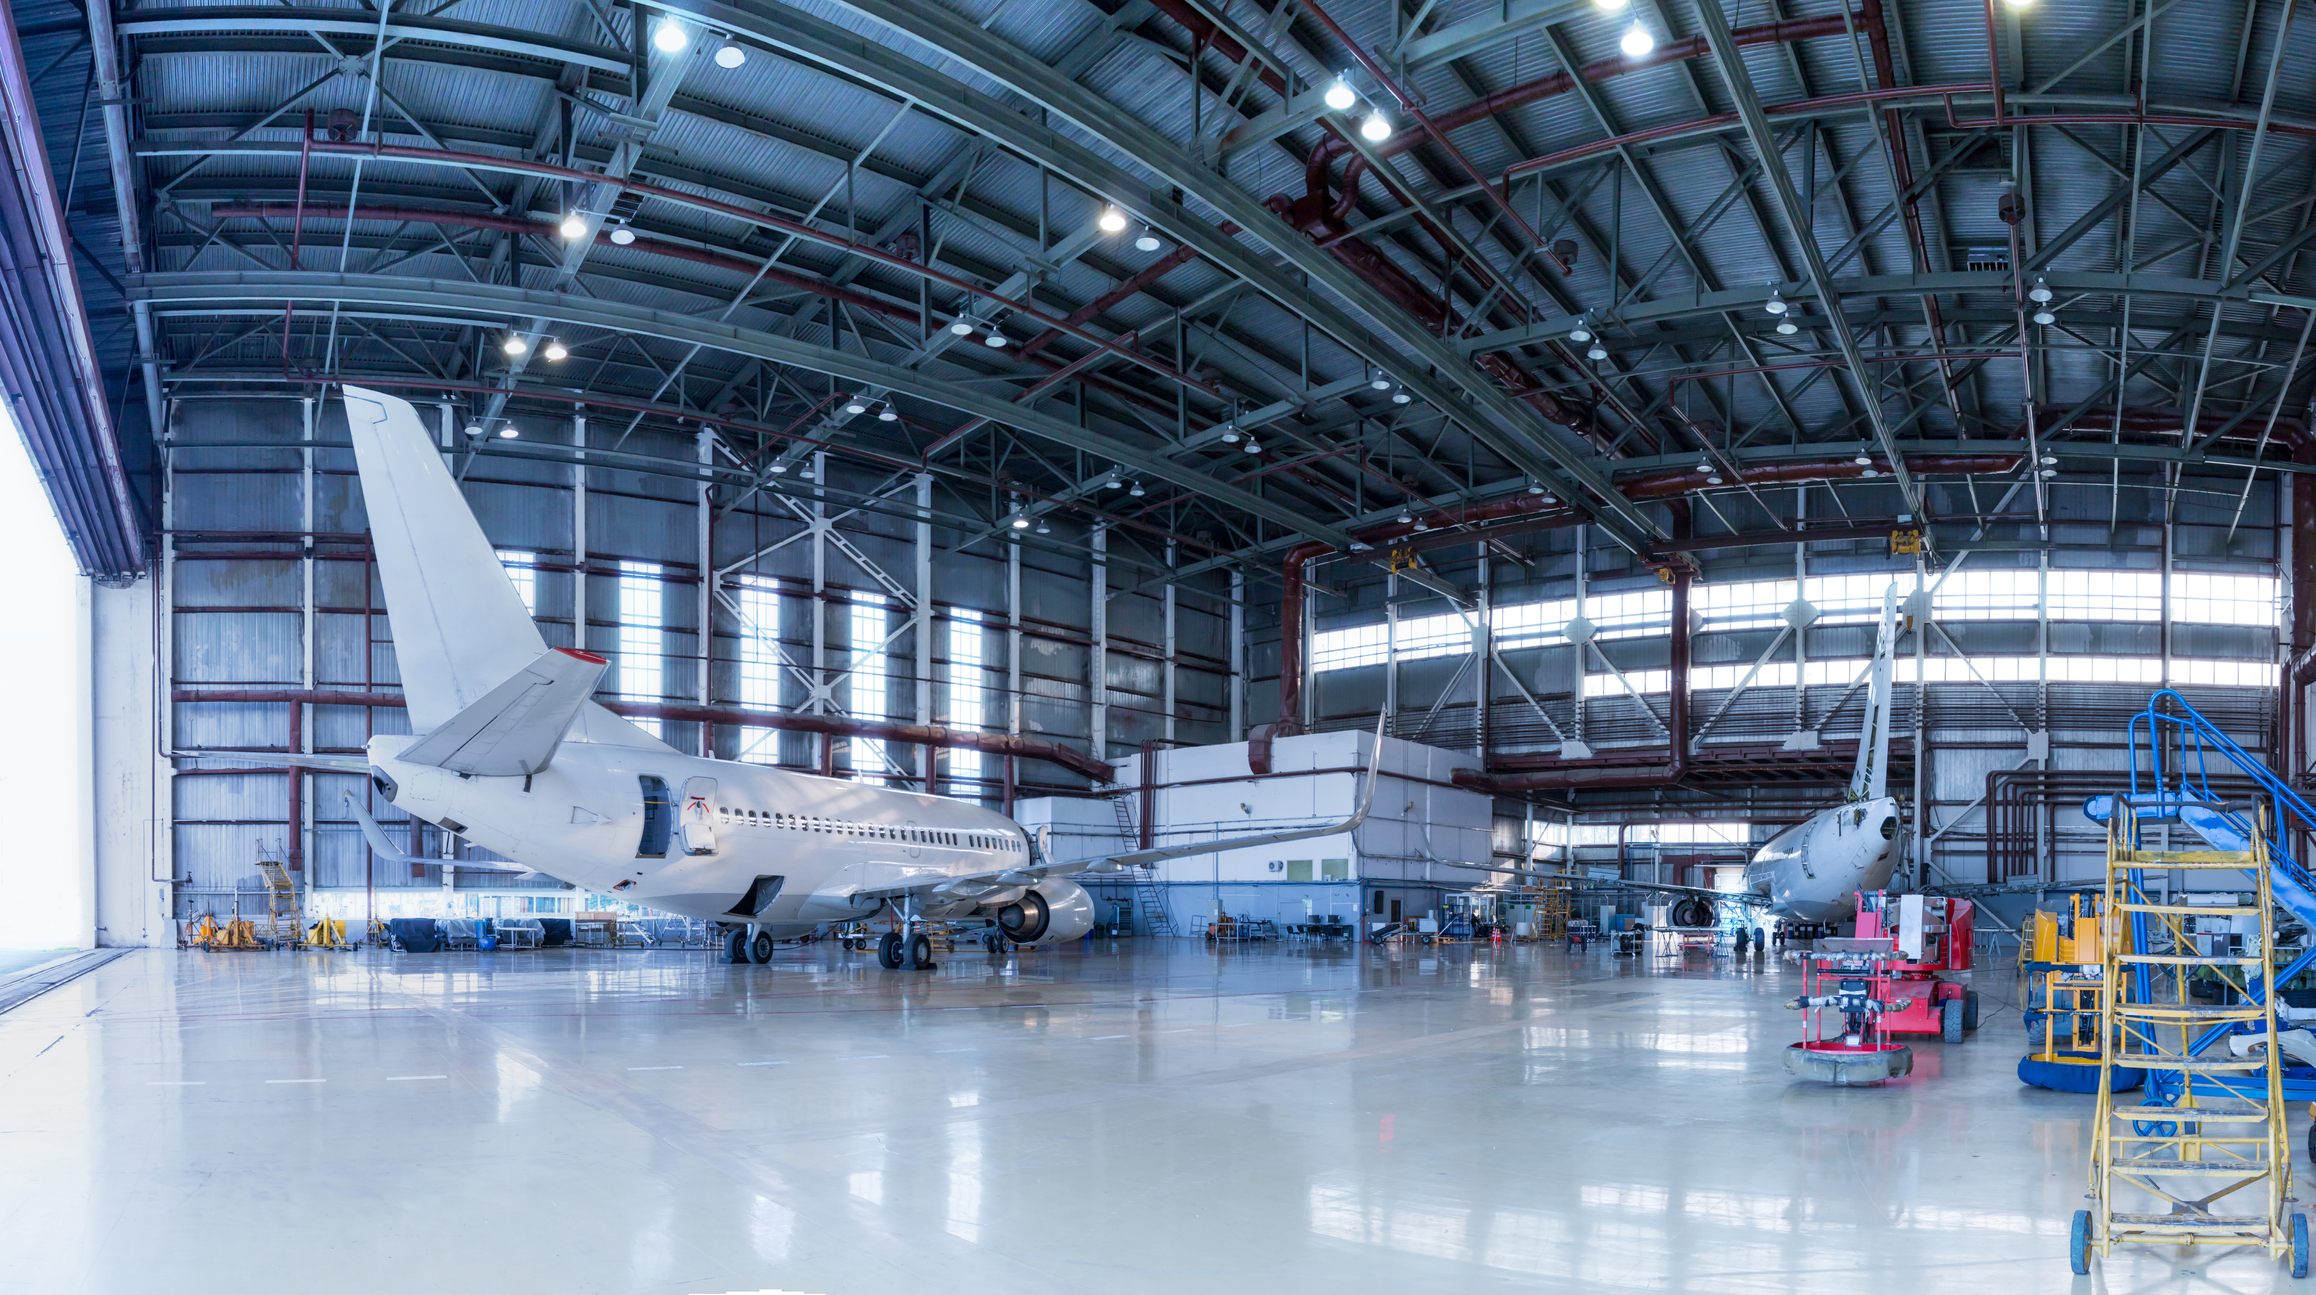 GettyImages 1157776570 - Things To Keep In Mind Before Building An Airplane Hangar Kit